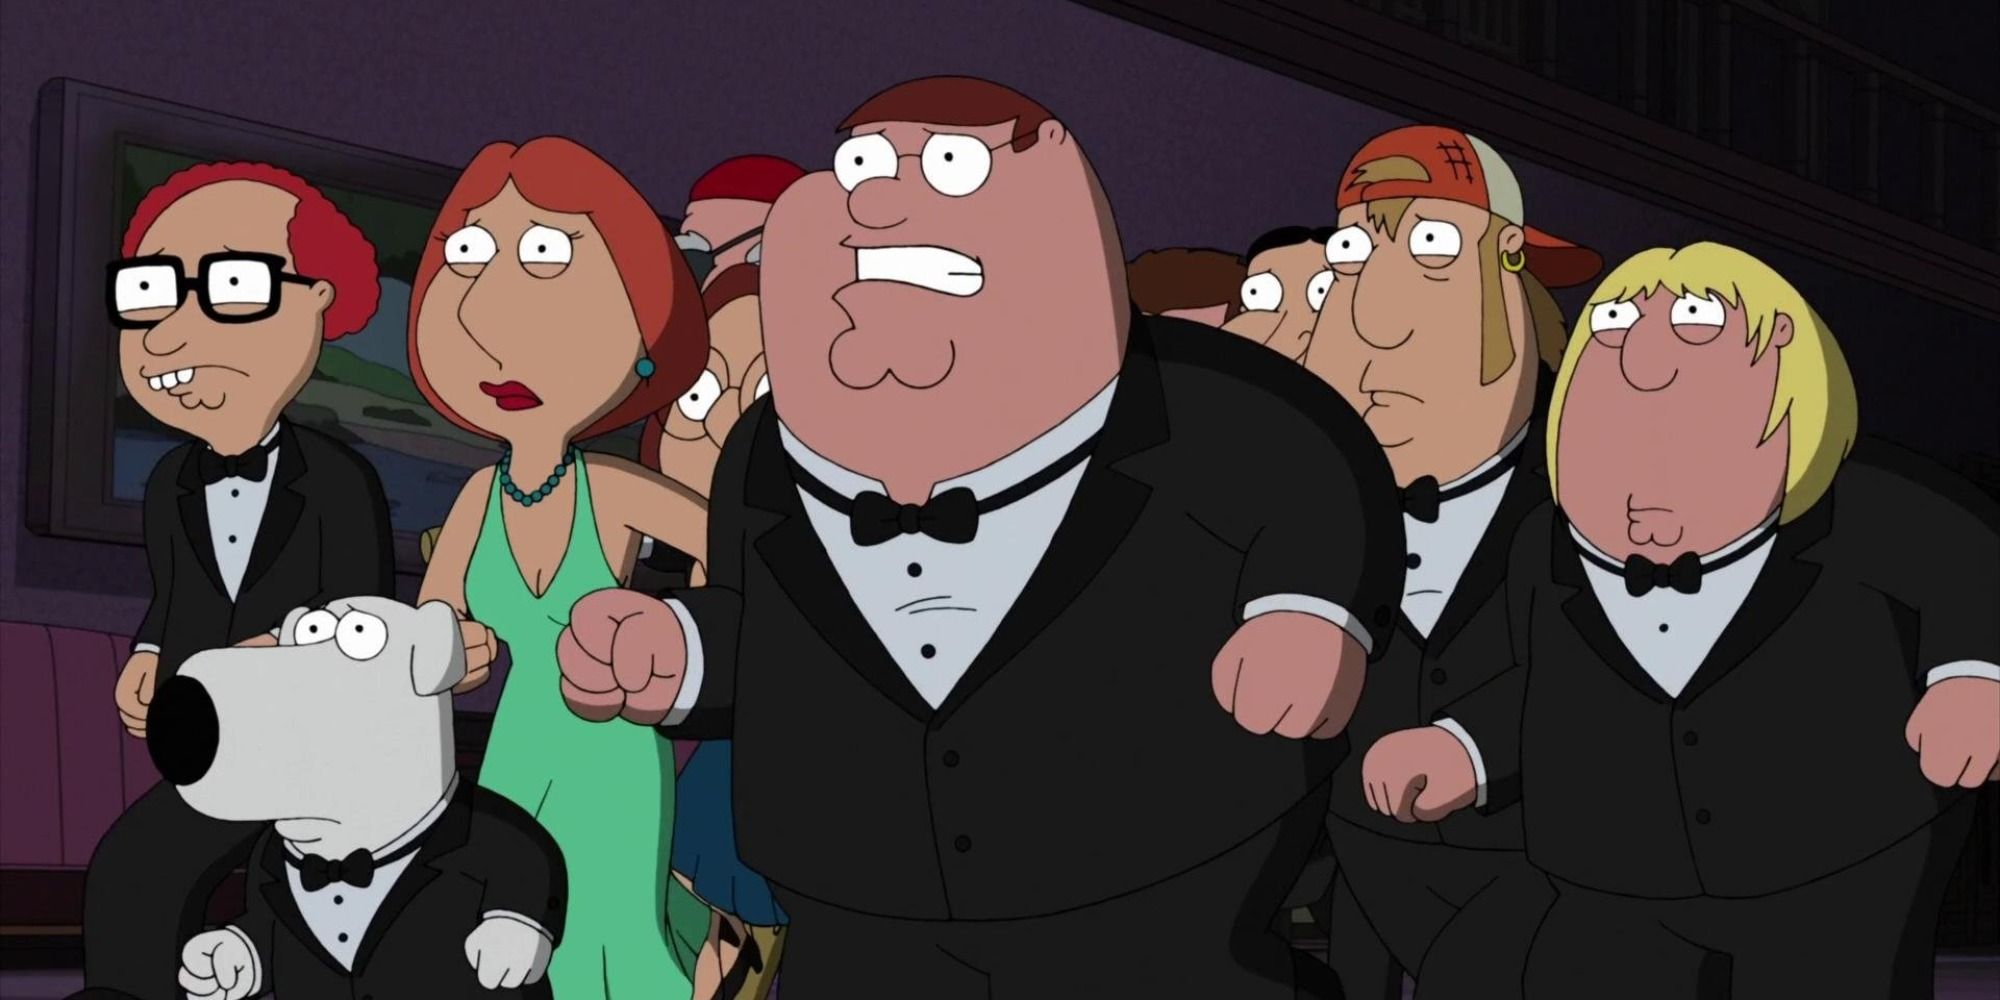 The Family Guy cast in suits